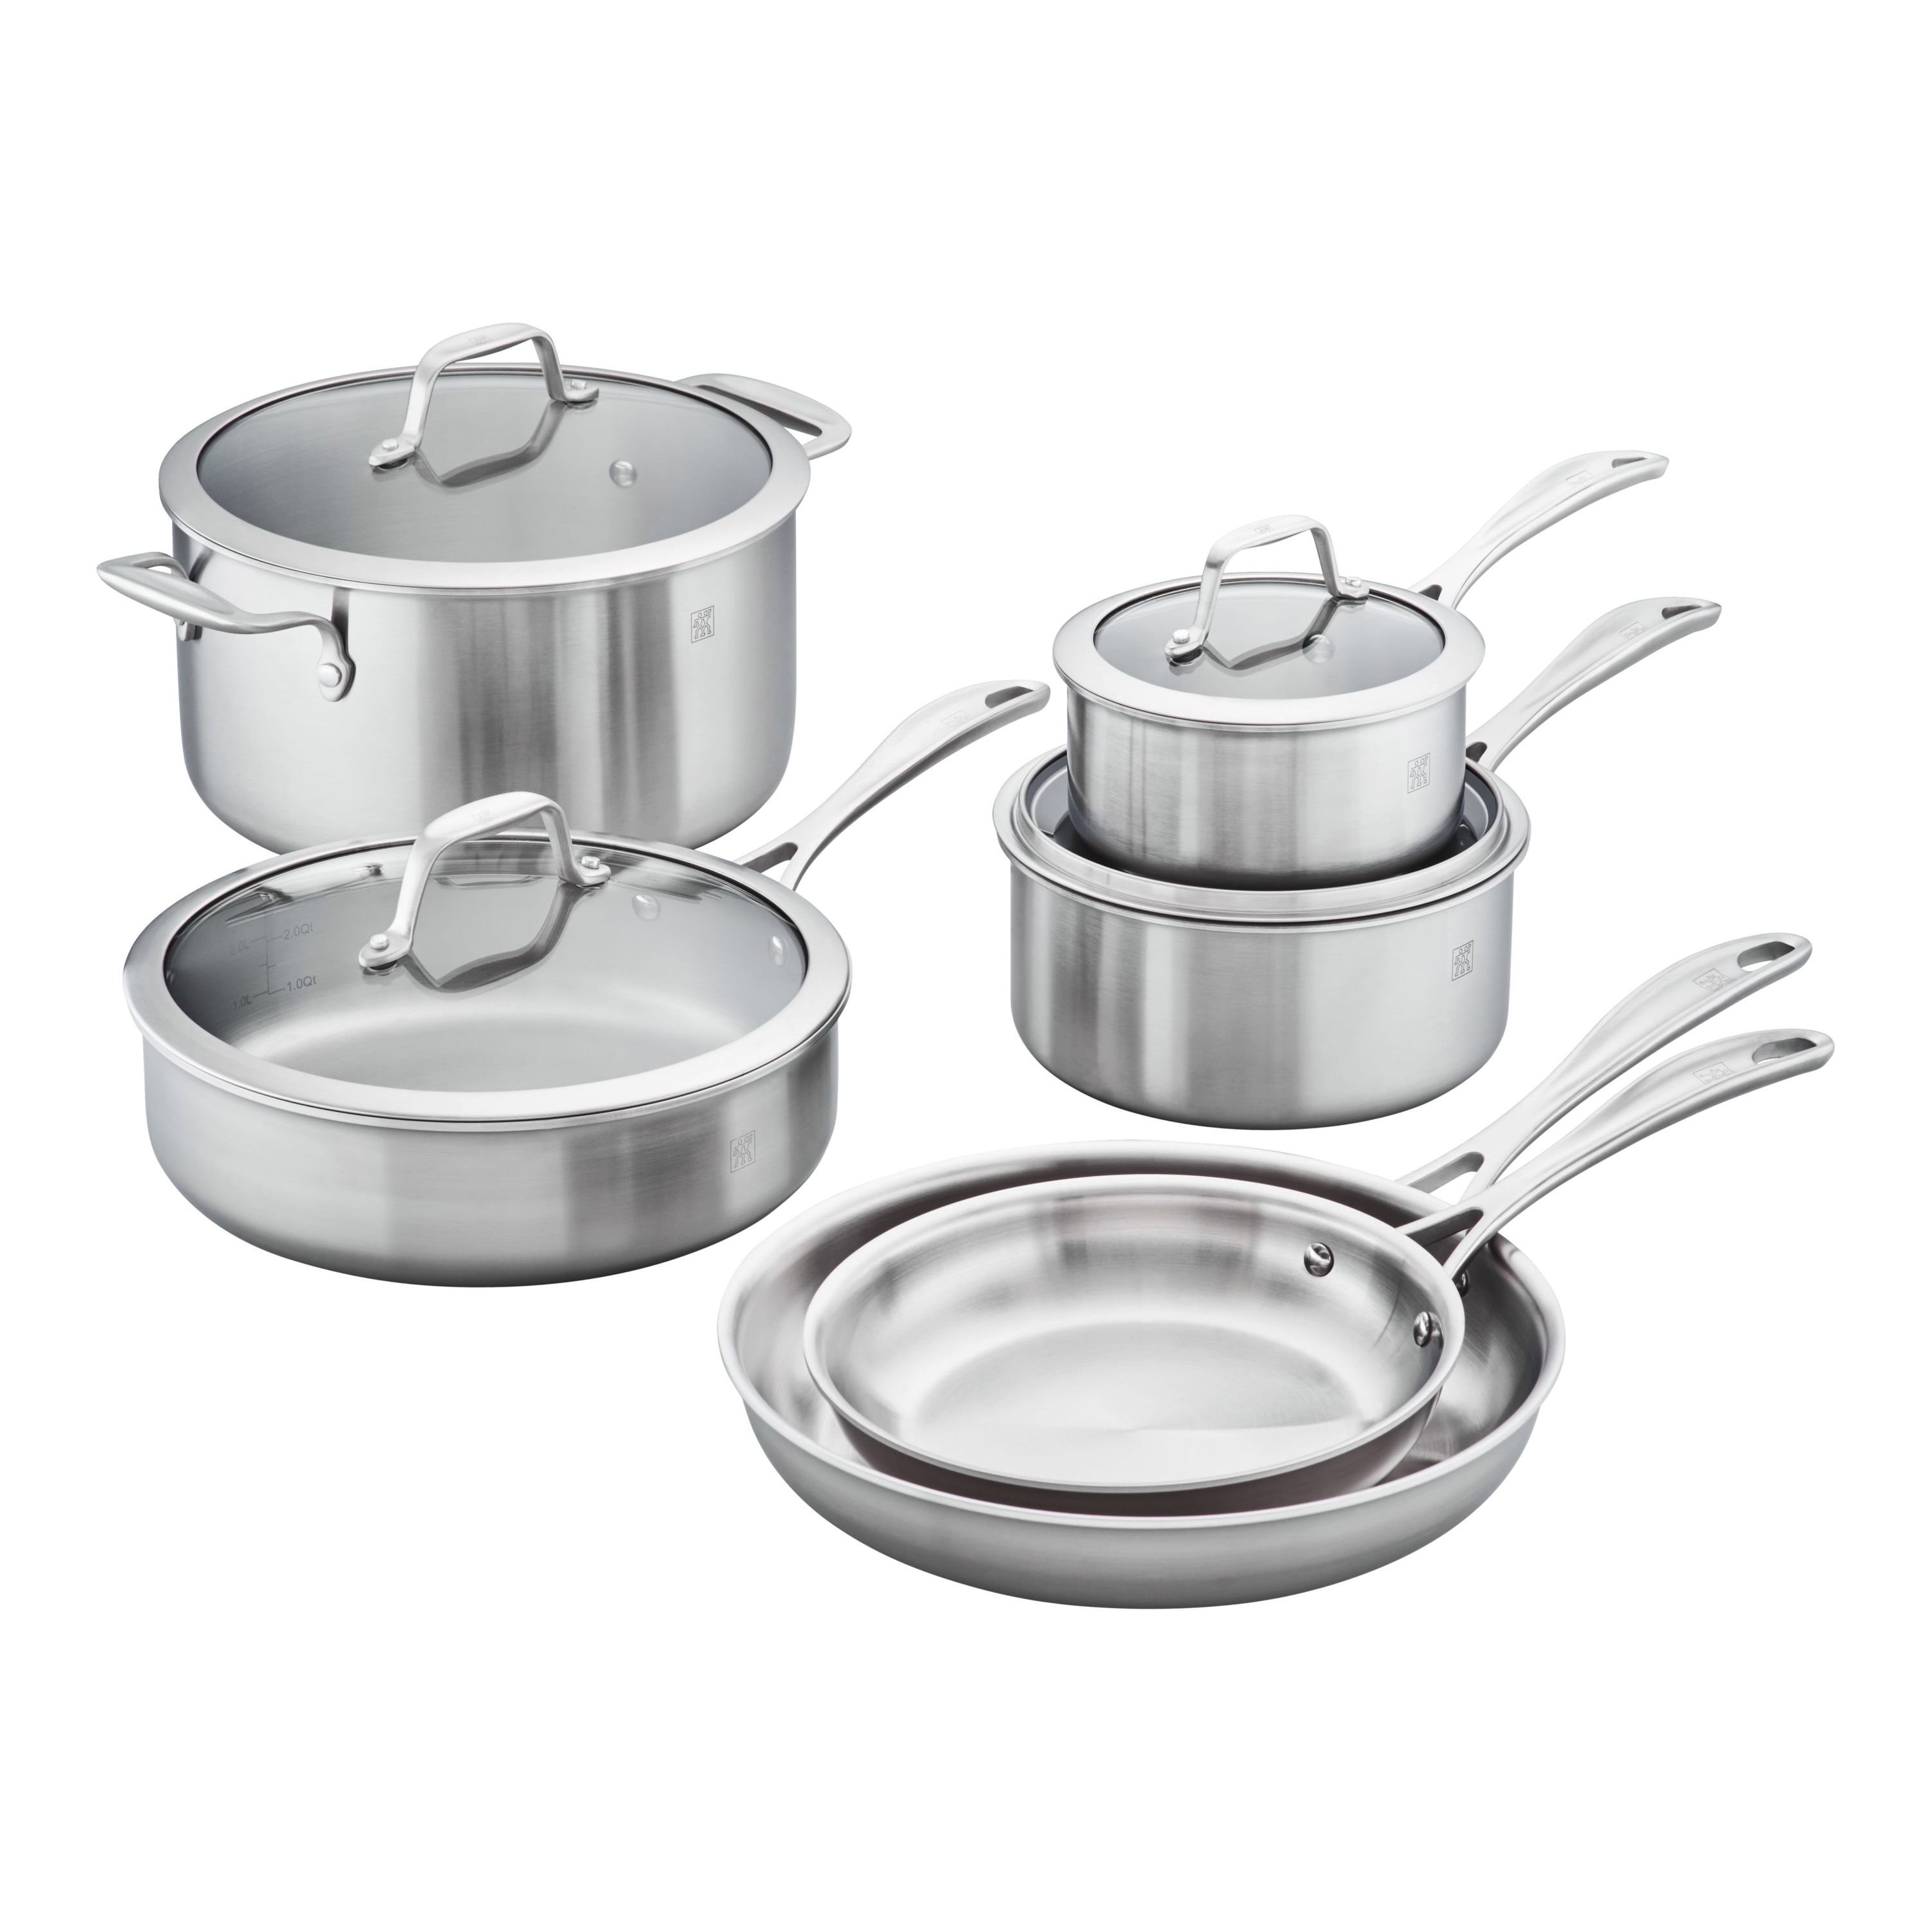 ZWILLING Spirit 3-Ply 10-pc, stainless steel, Cookware Set